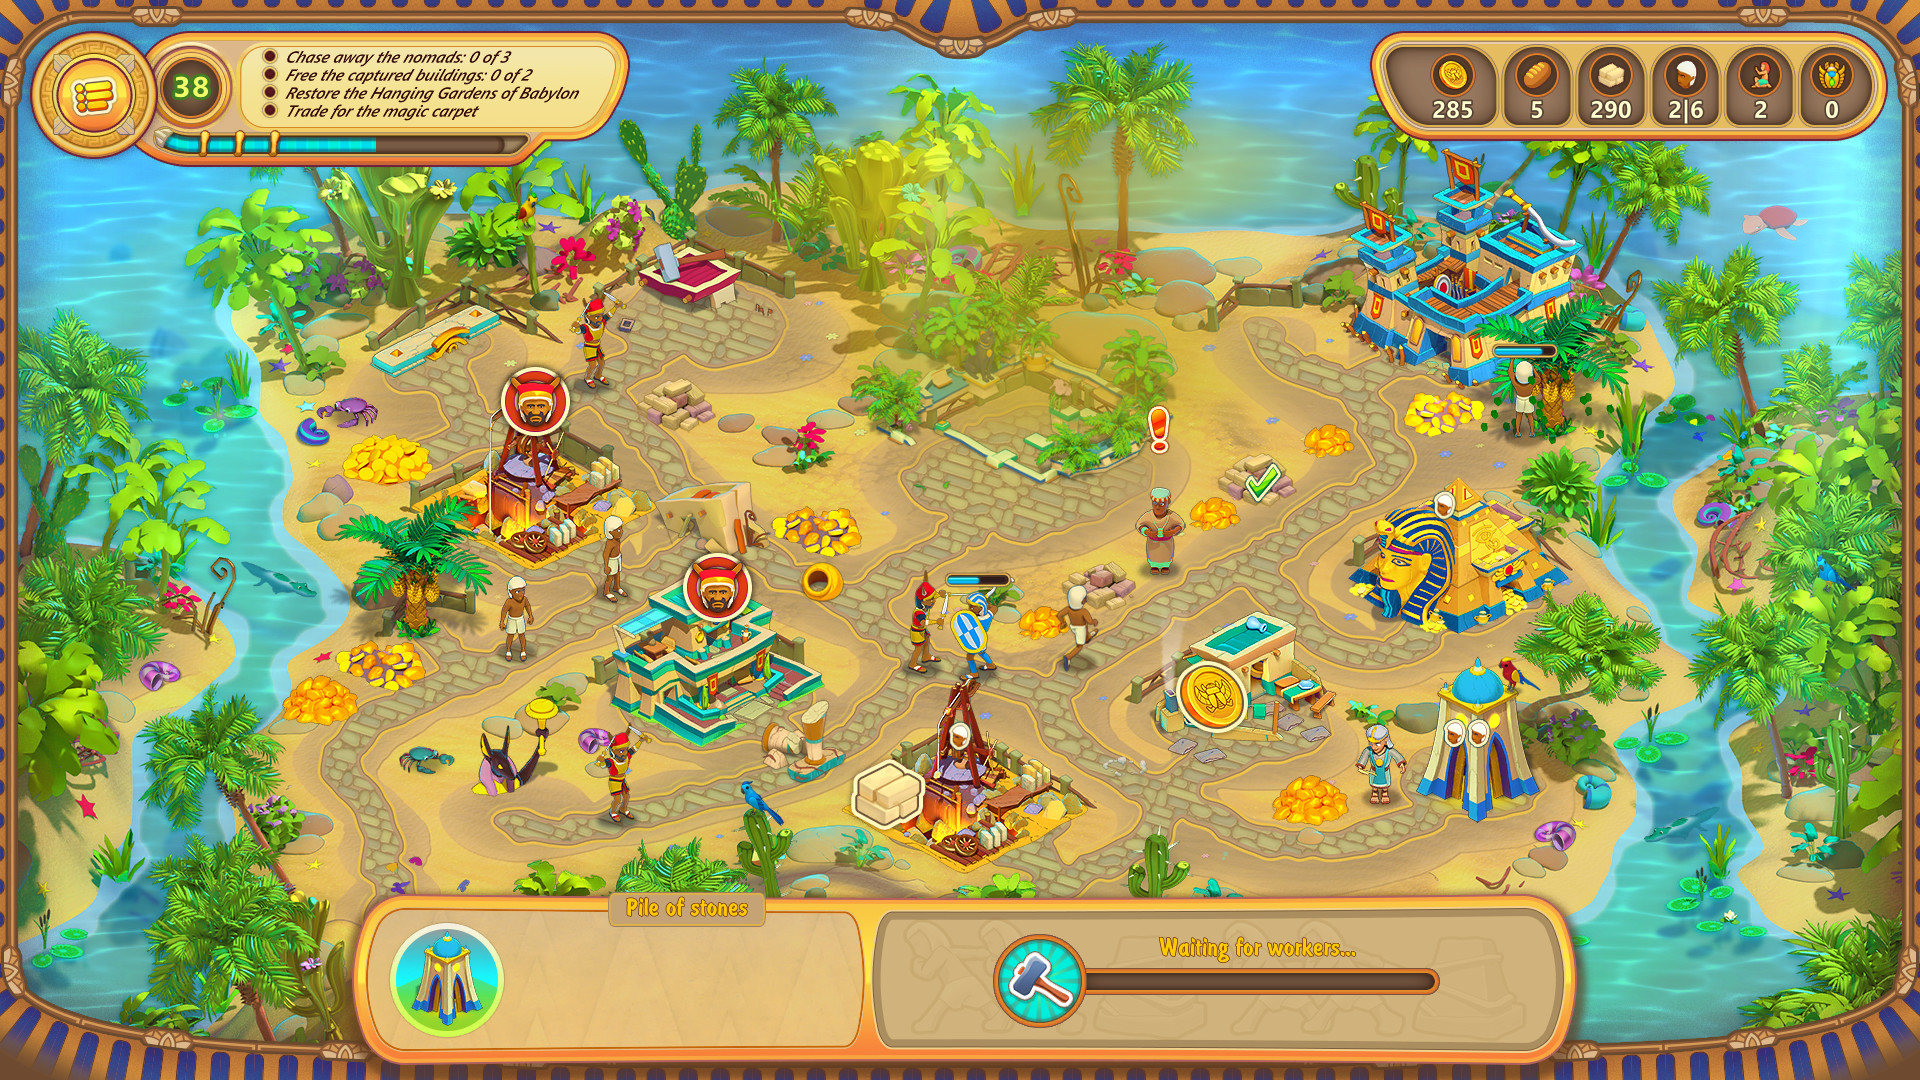 The Great Empire: Relic of Egypt screenshot